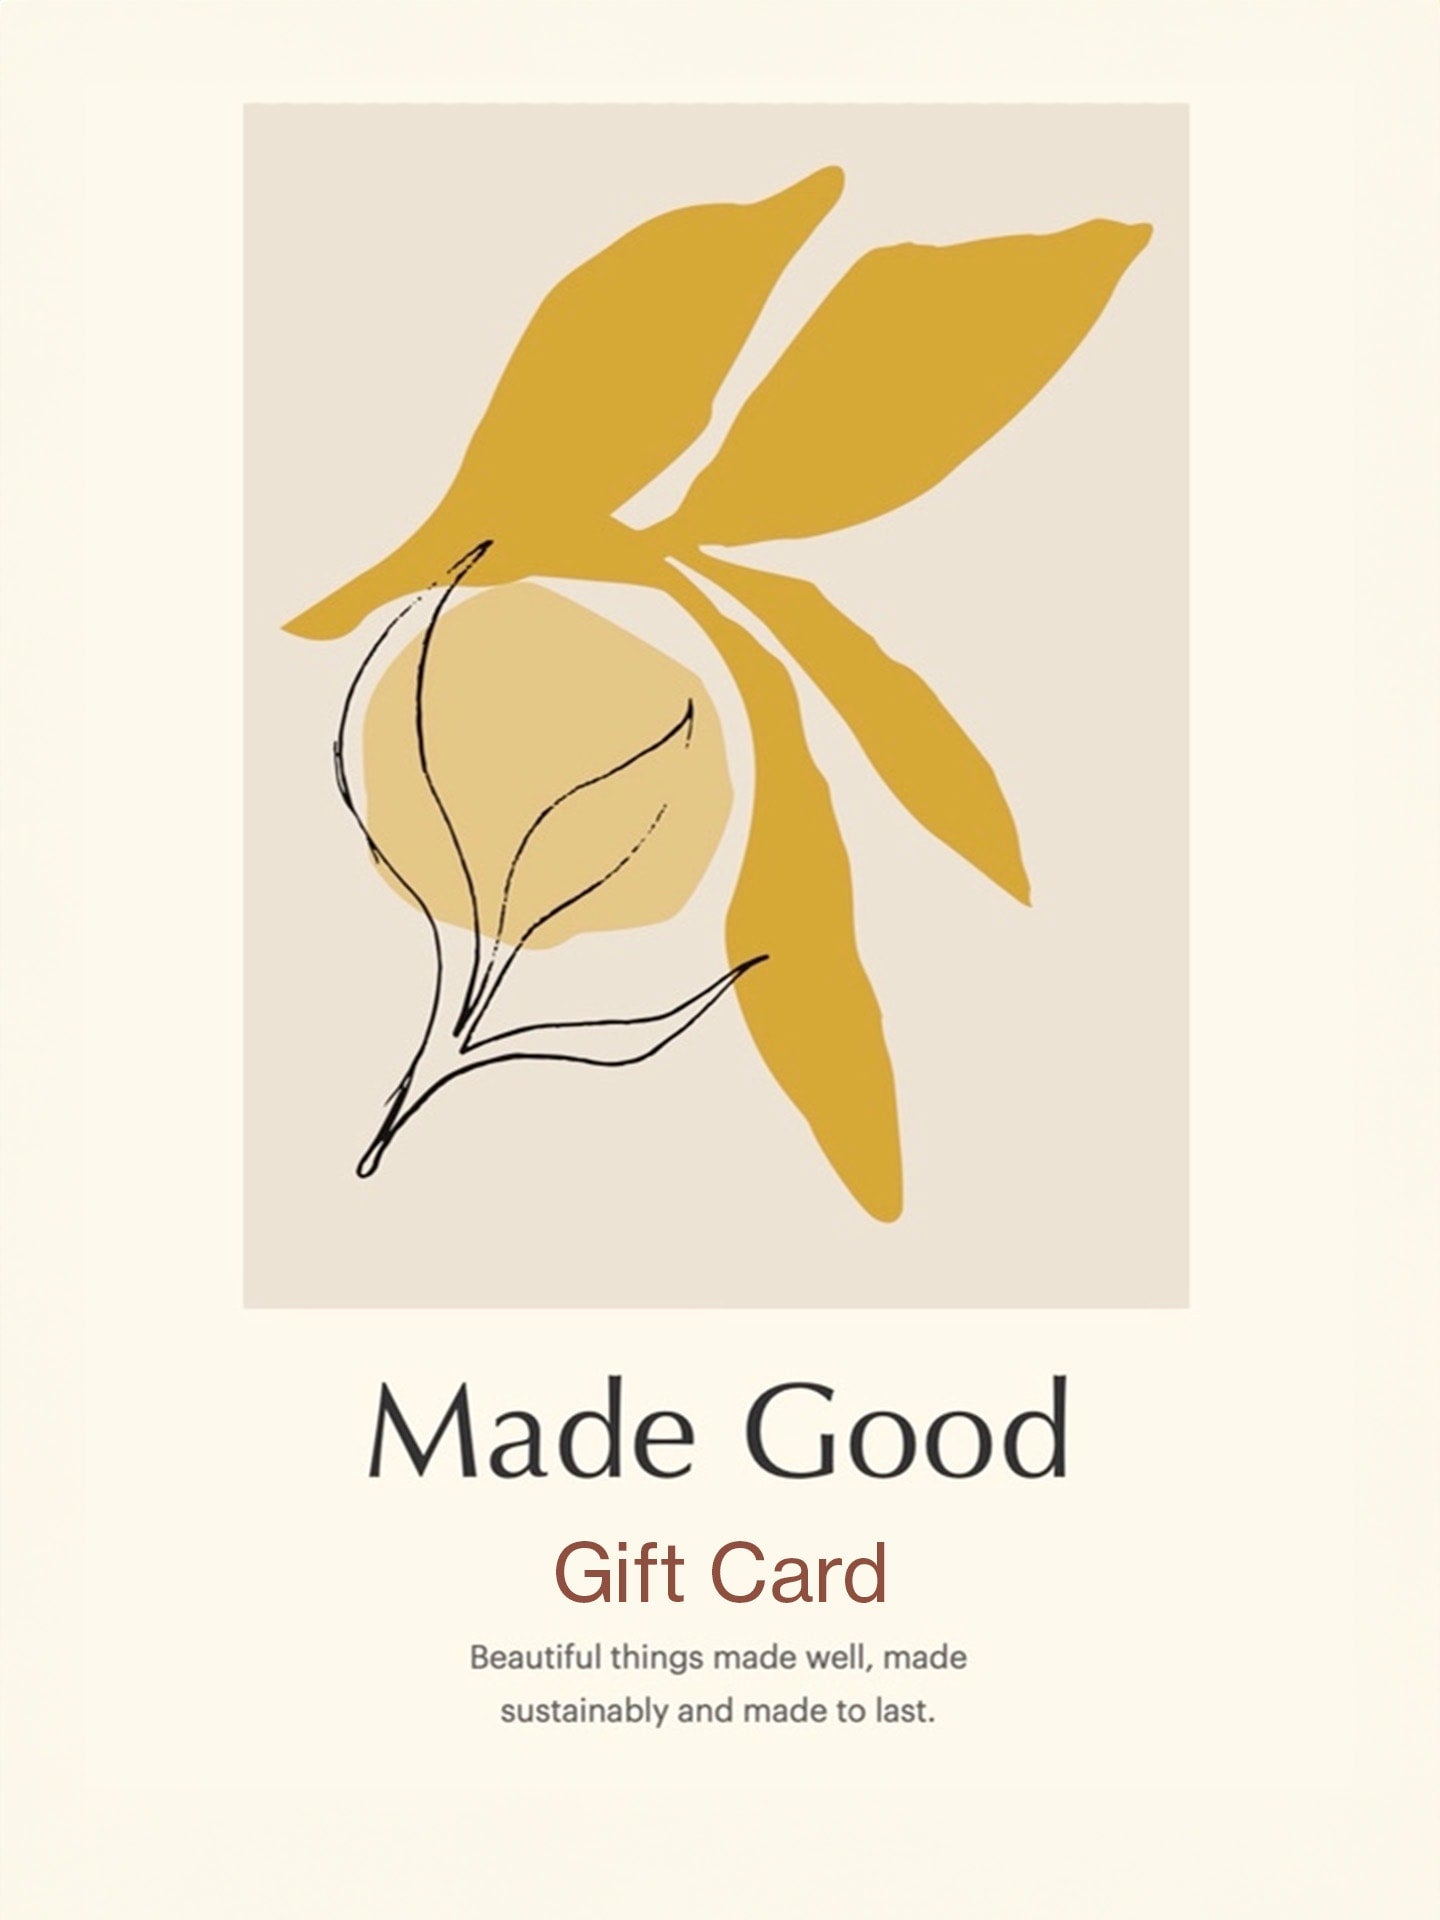 A redeemable Made Good Ltd gift card featuring a beautiful flower illustration, conveniently stored in Apple Wallet.